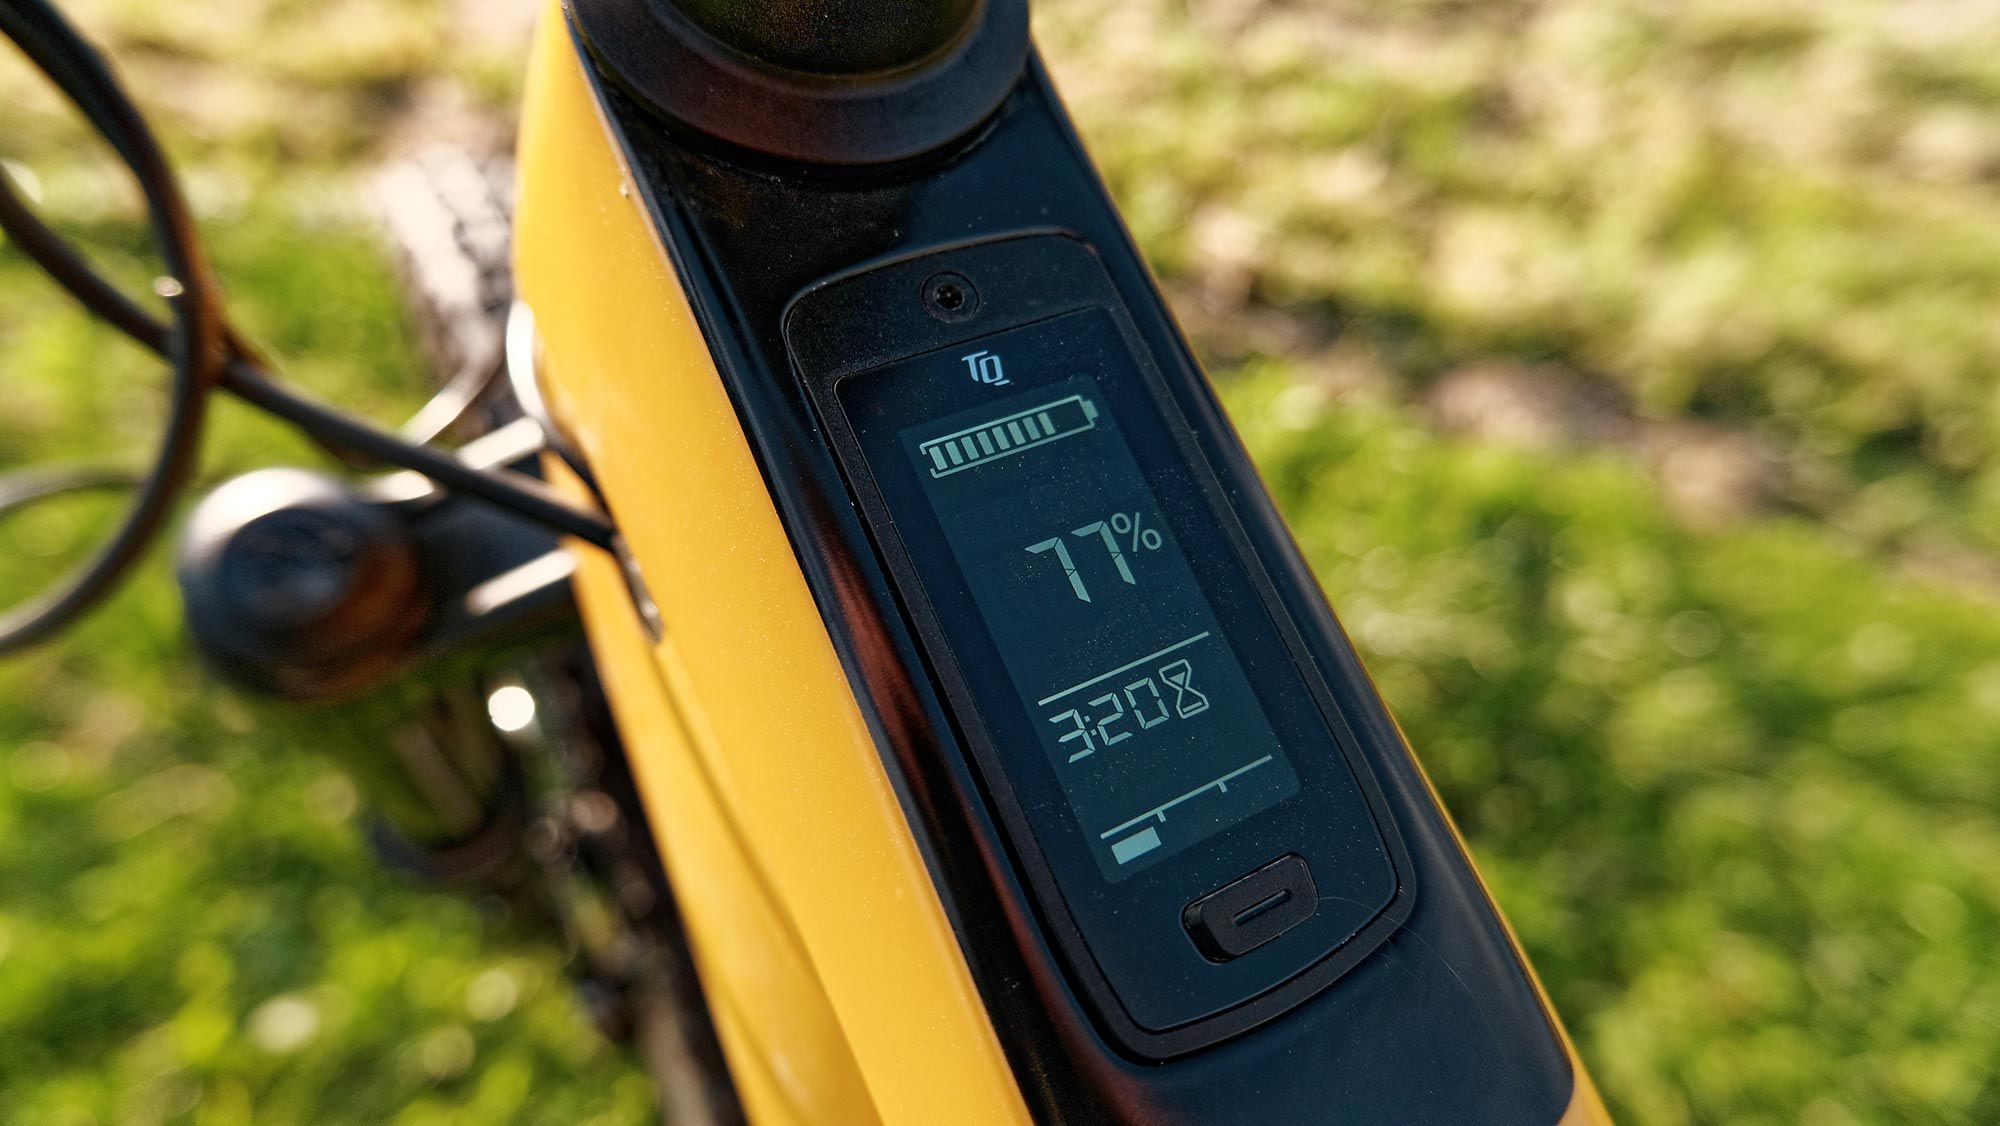 A cleanly integrated toptube display screen conveys key ride information, including battery life remaining.